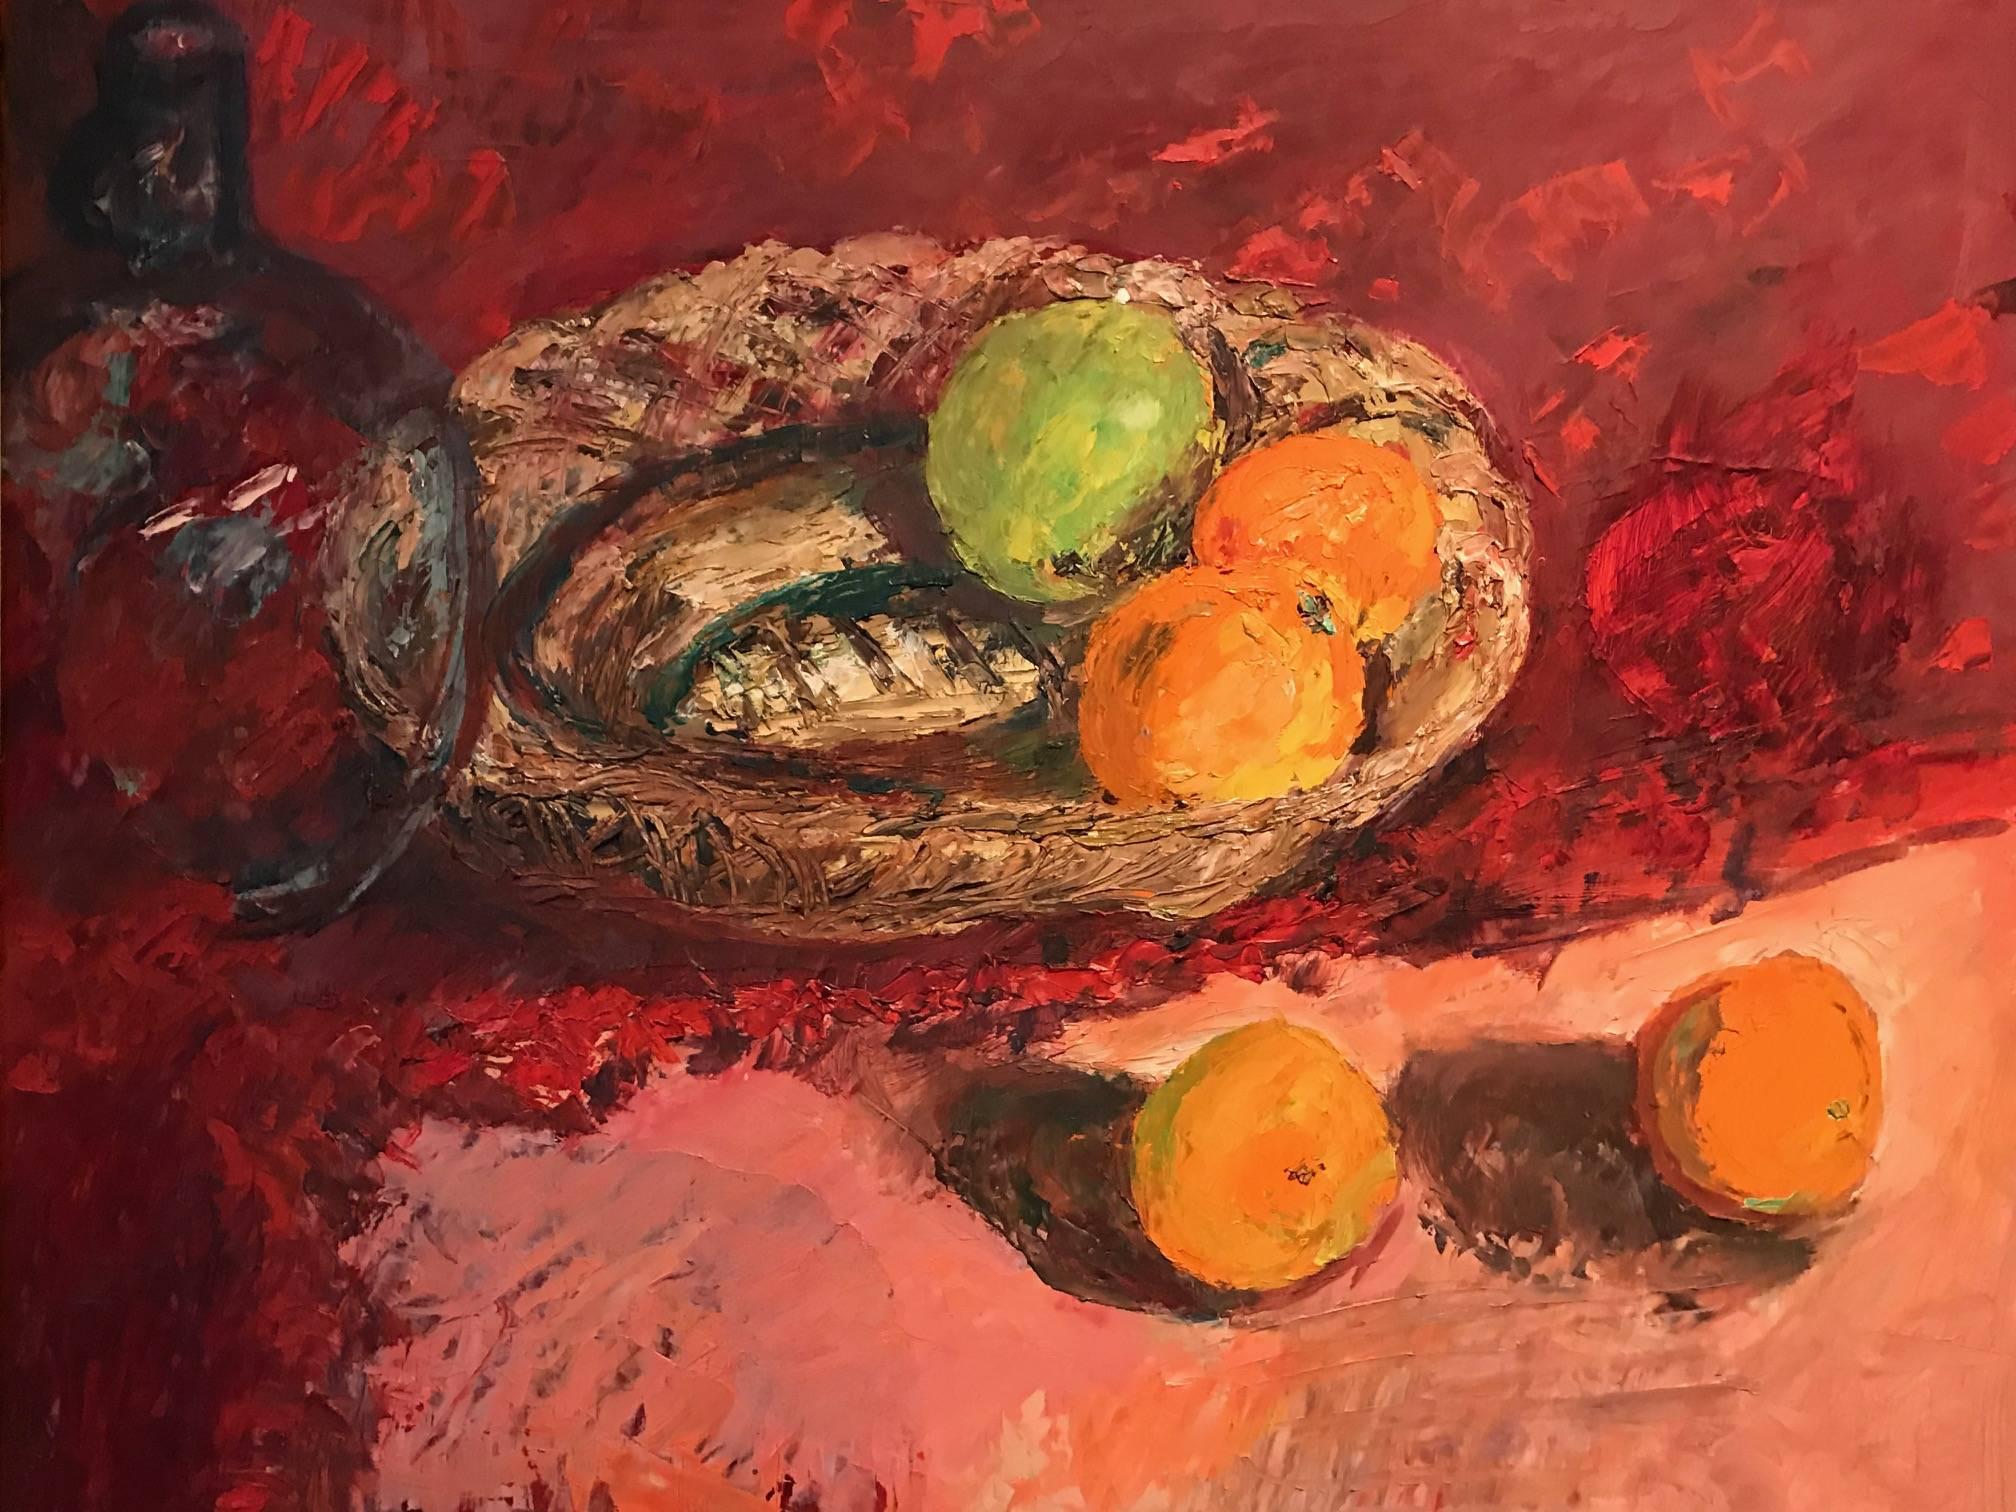 Mid 20thC English Post-Impressionist Still Life Oil - Apple & Oranges - Brown Still-Life Painting by Unknown